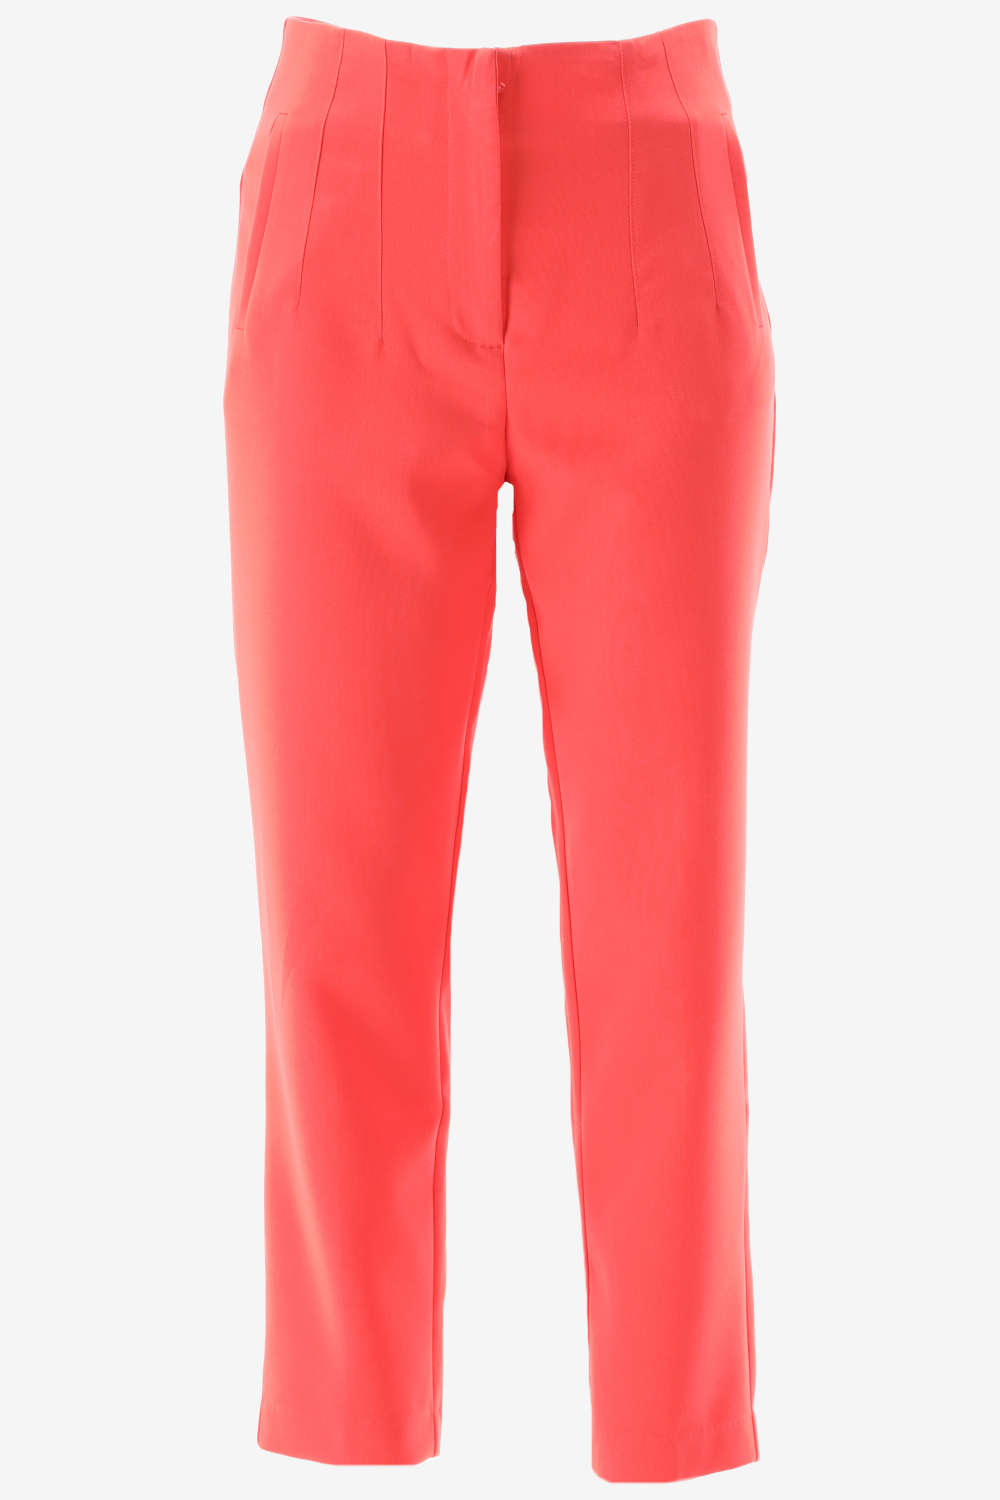 Only Onlraven Hw Pant Cayenne L32 ROOD 42